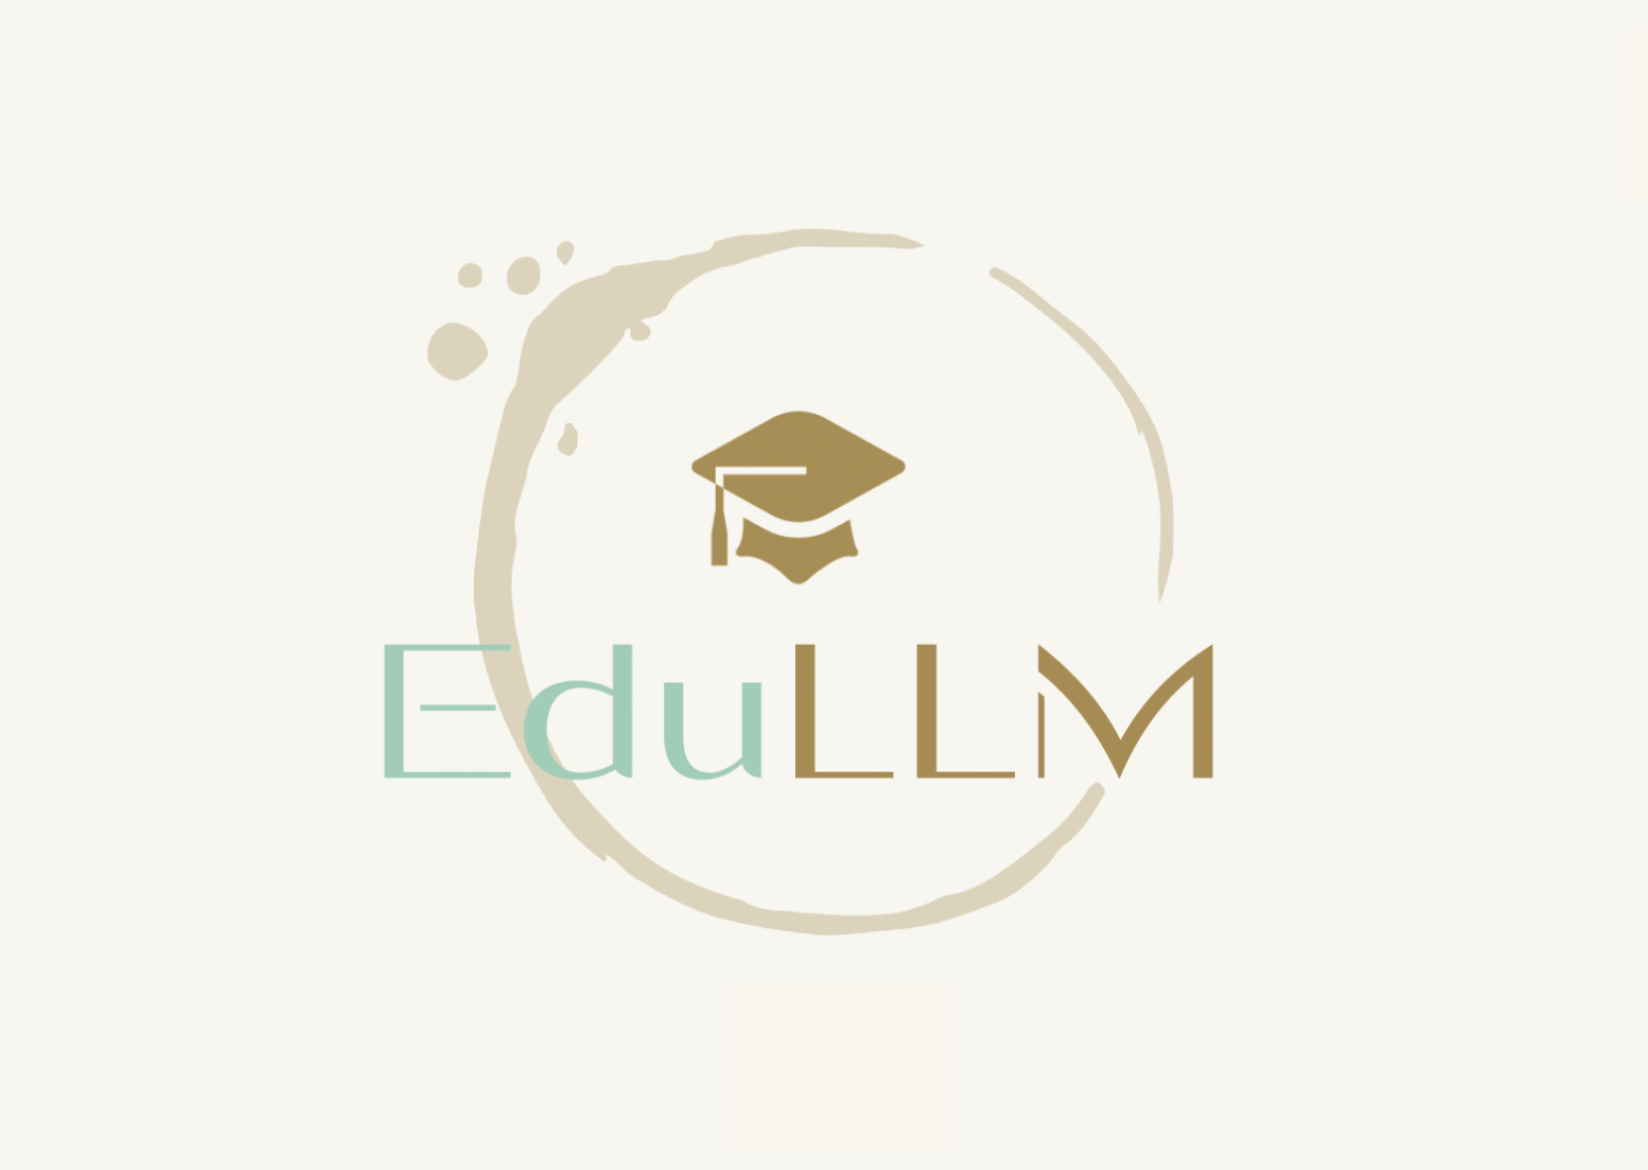 edullm - From the idea to the first lesson in days not months